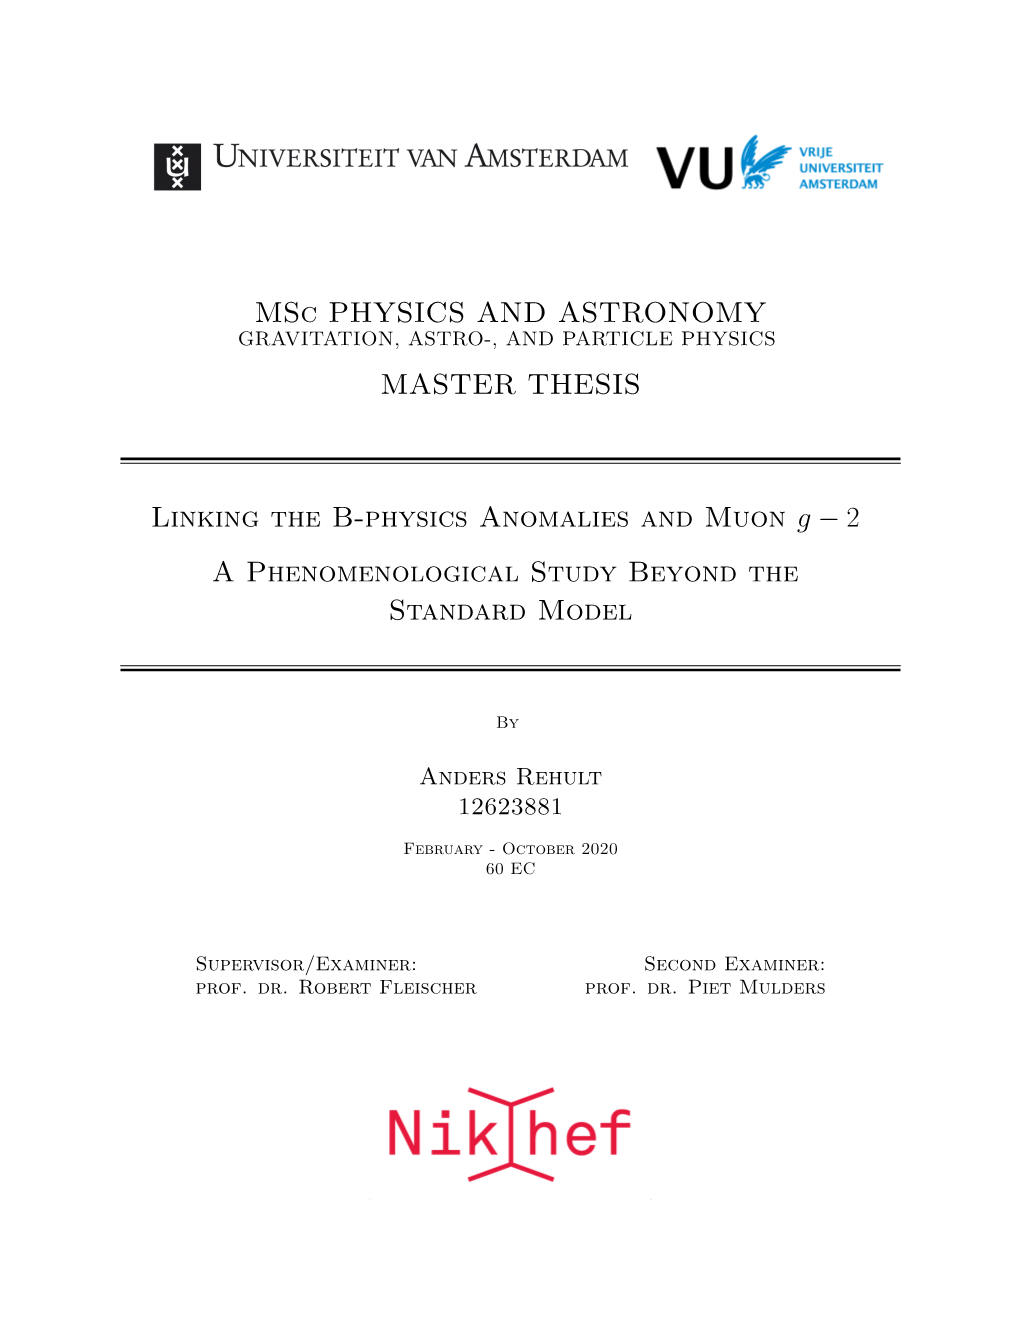 MASTER THESIS Linking the B-Physics Anomalies and Muon G